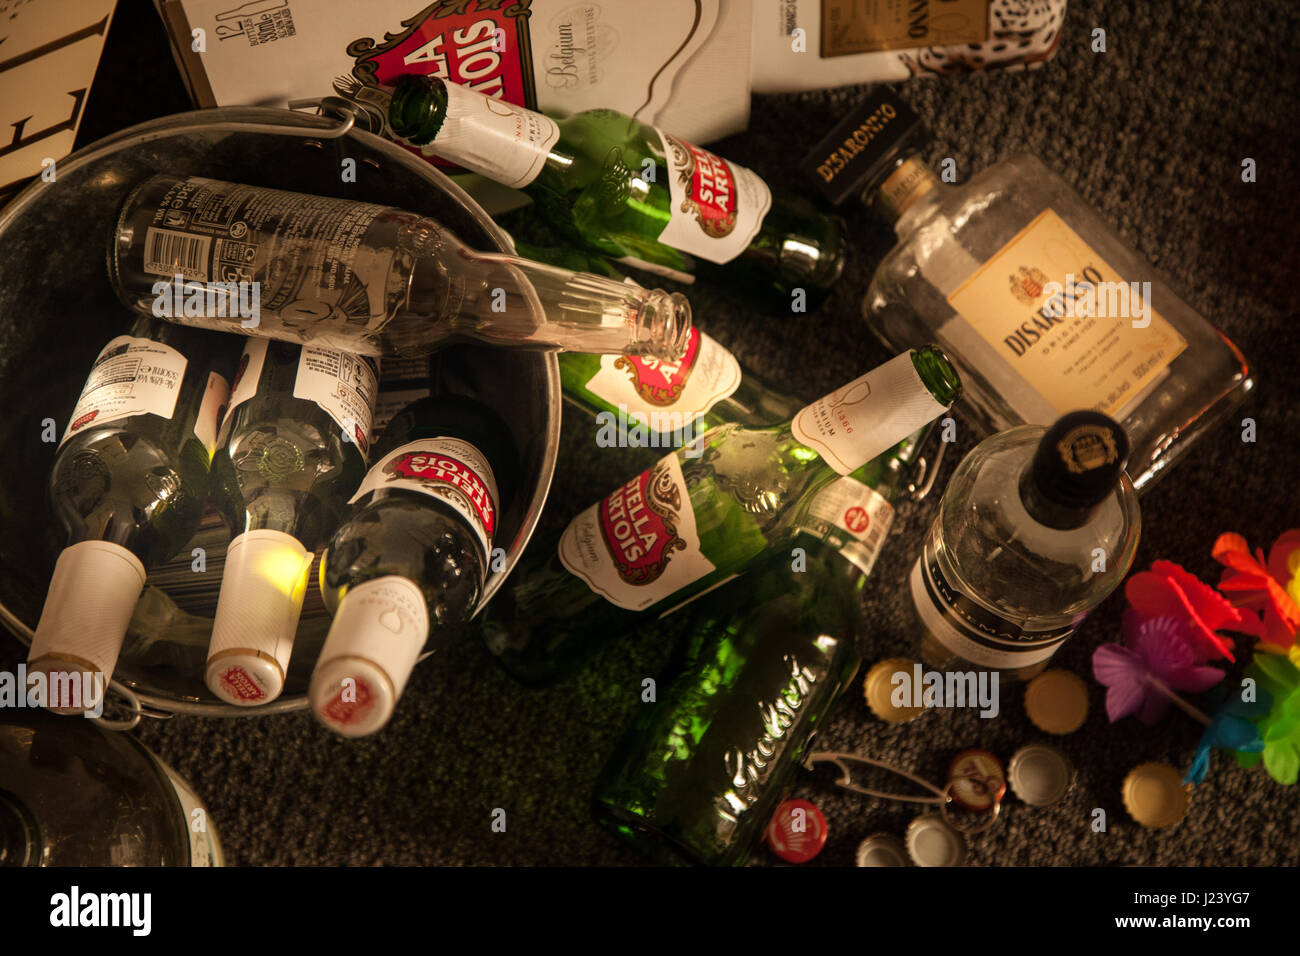 Alcohol Bottles At A Party Stock Photo Alamy